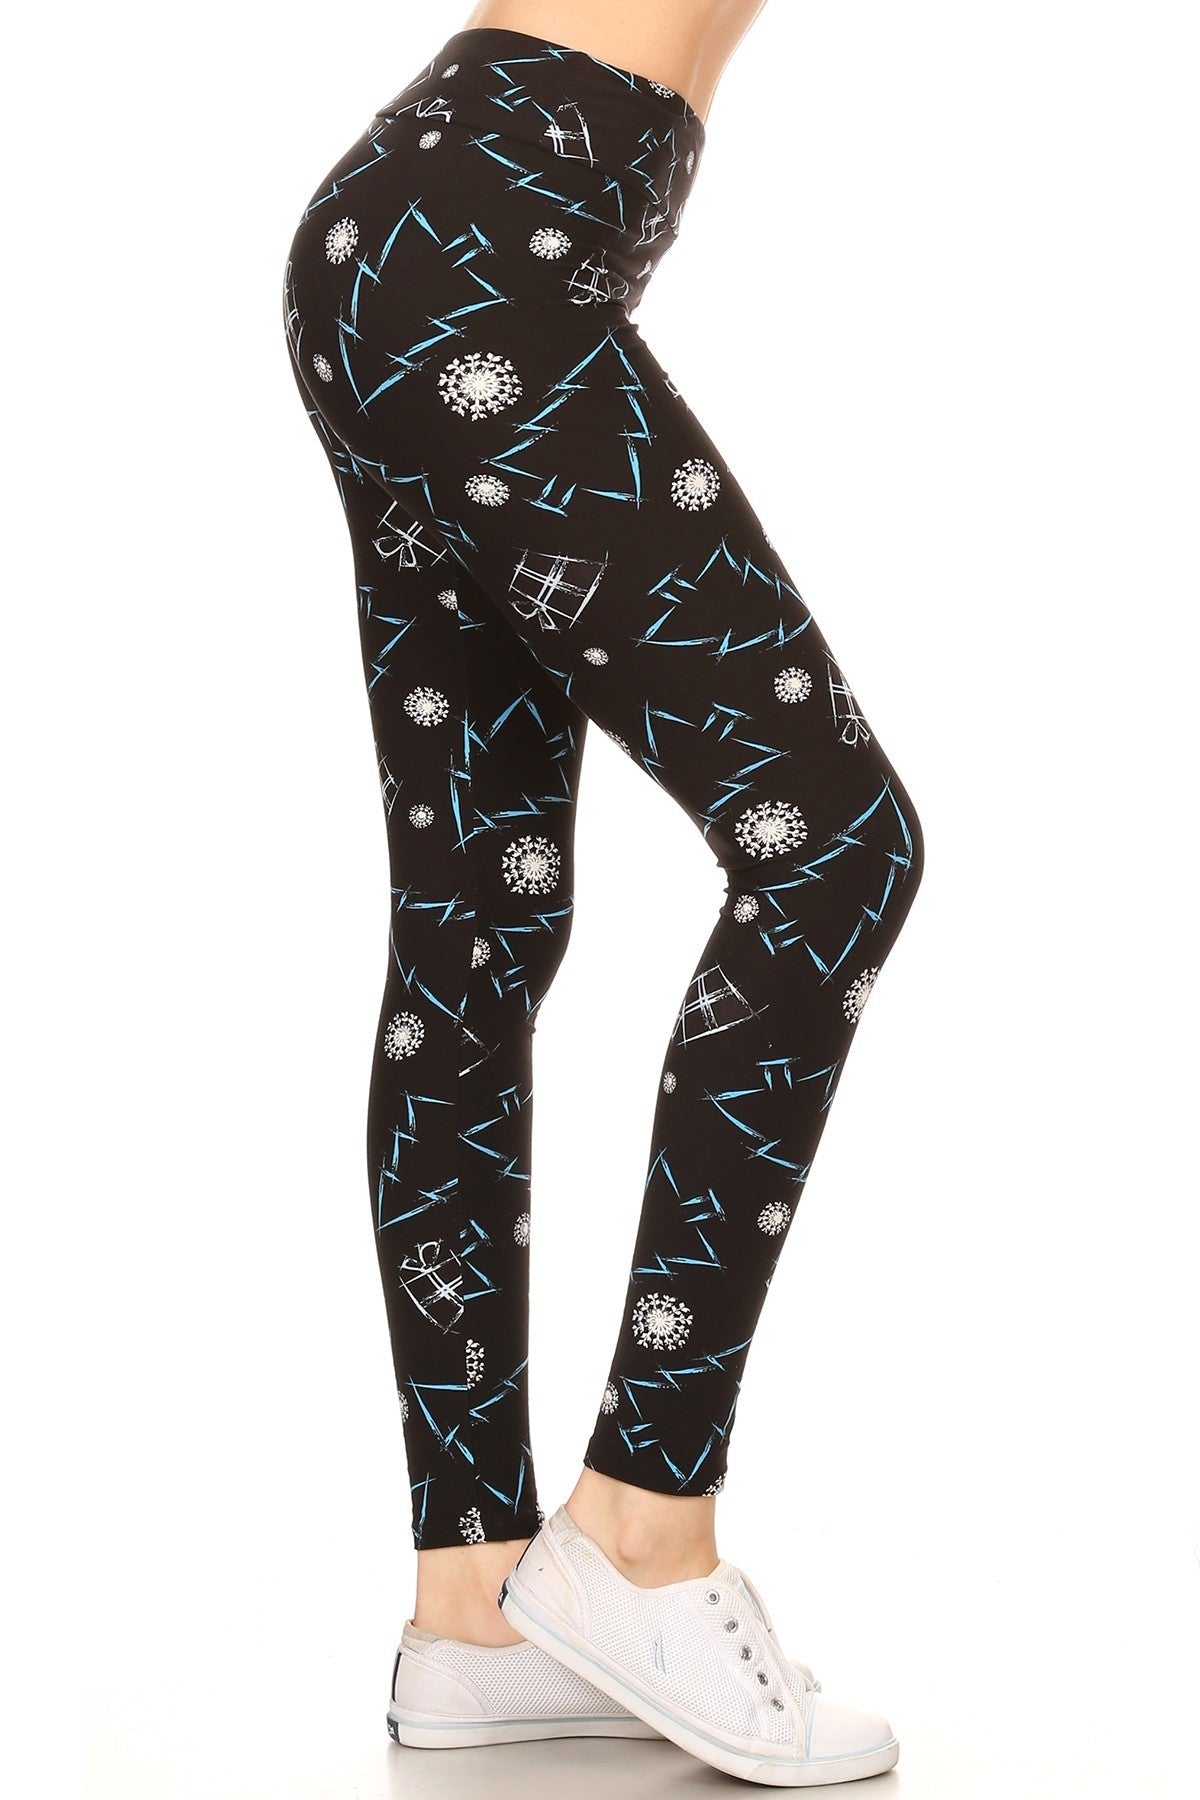 Yoga Style Banded Lined Tree Printed Knit Legging With High Waist Smile Sparker